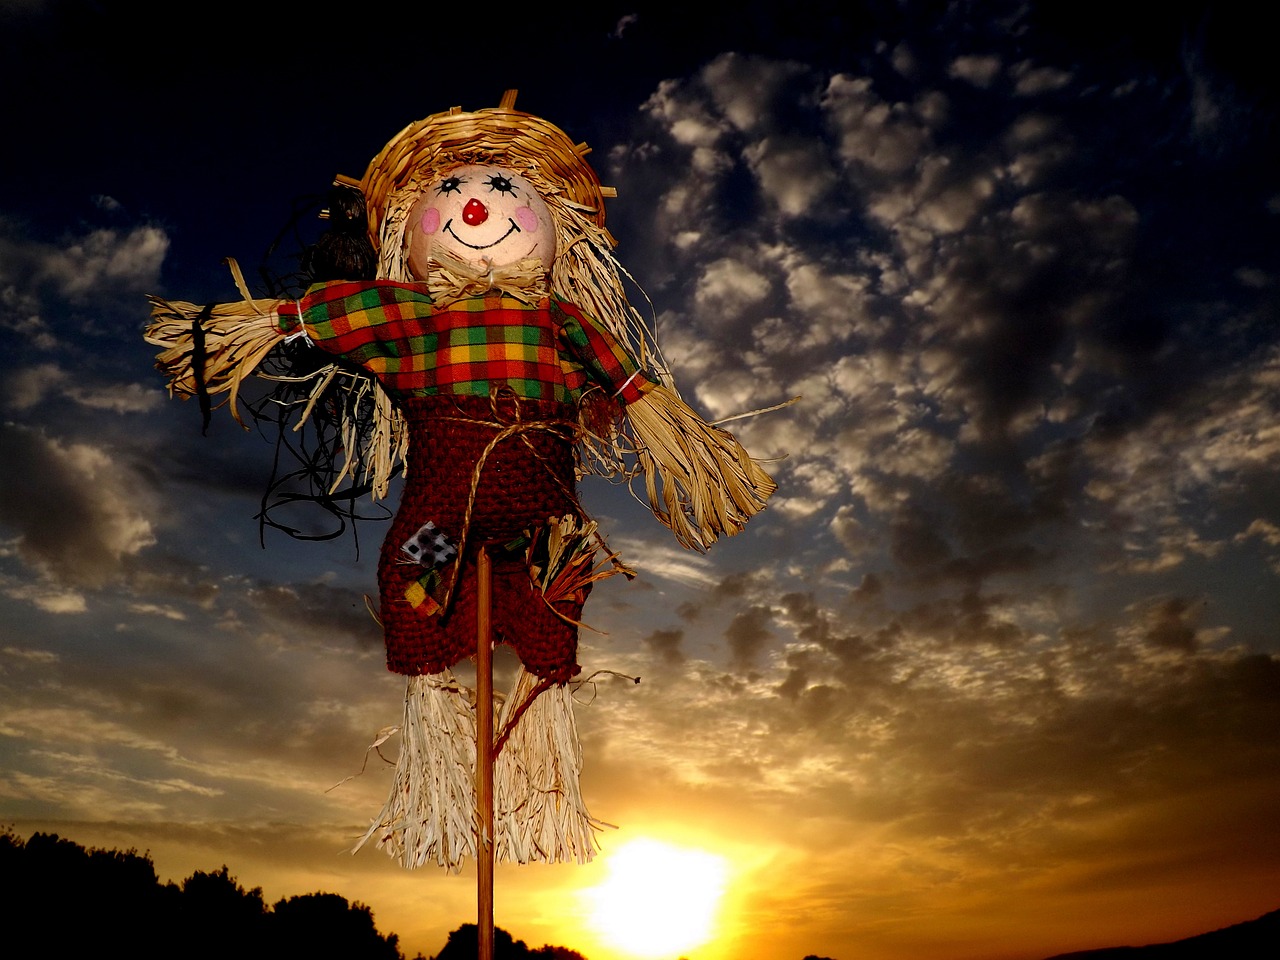 scarecrow east cloud free photo